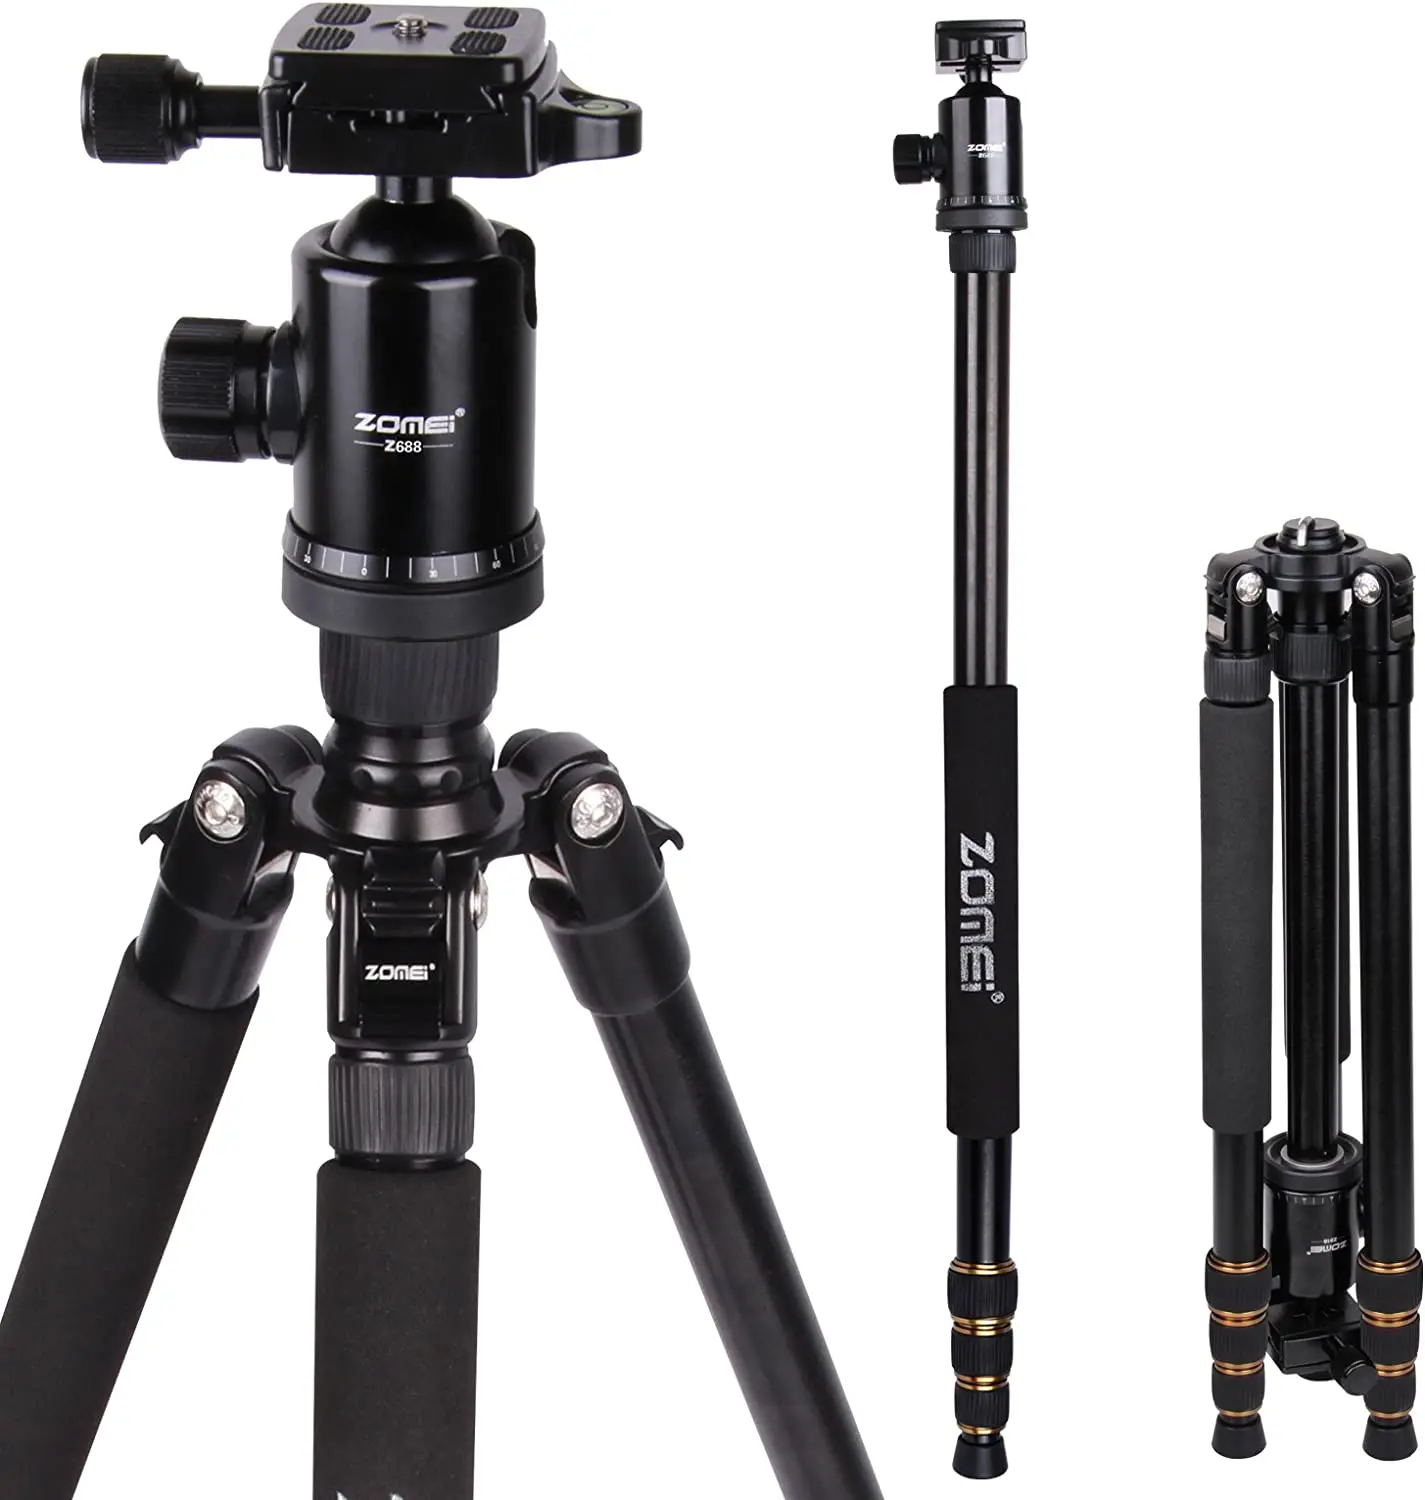 

ZOMEI Z688 Aluminum Tripod Magnesium Alloy Monopod Stand with Ball Head and Quick Release Plate for DSLR Camera